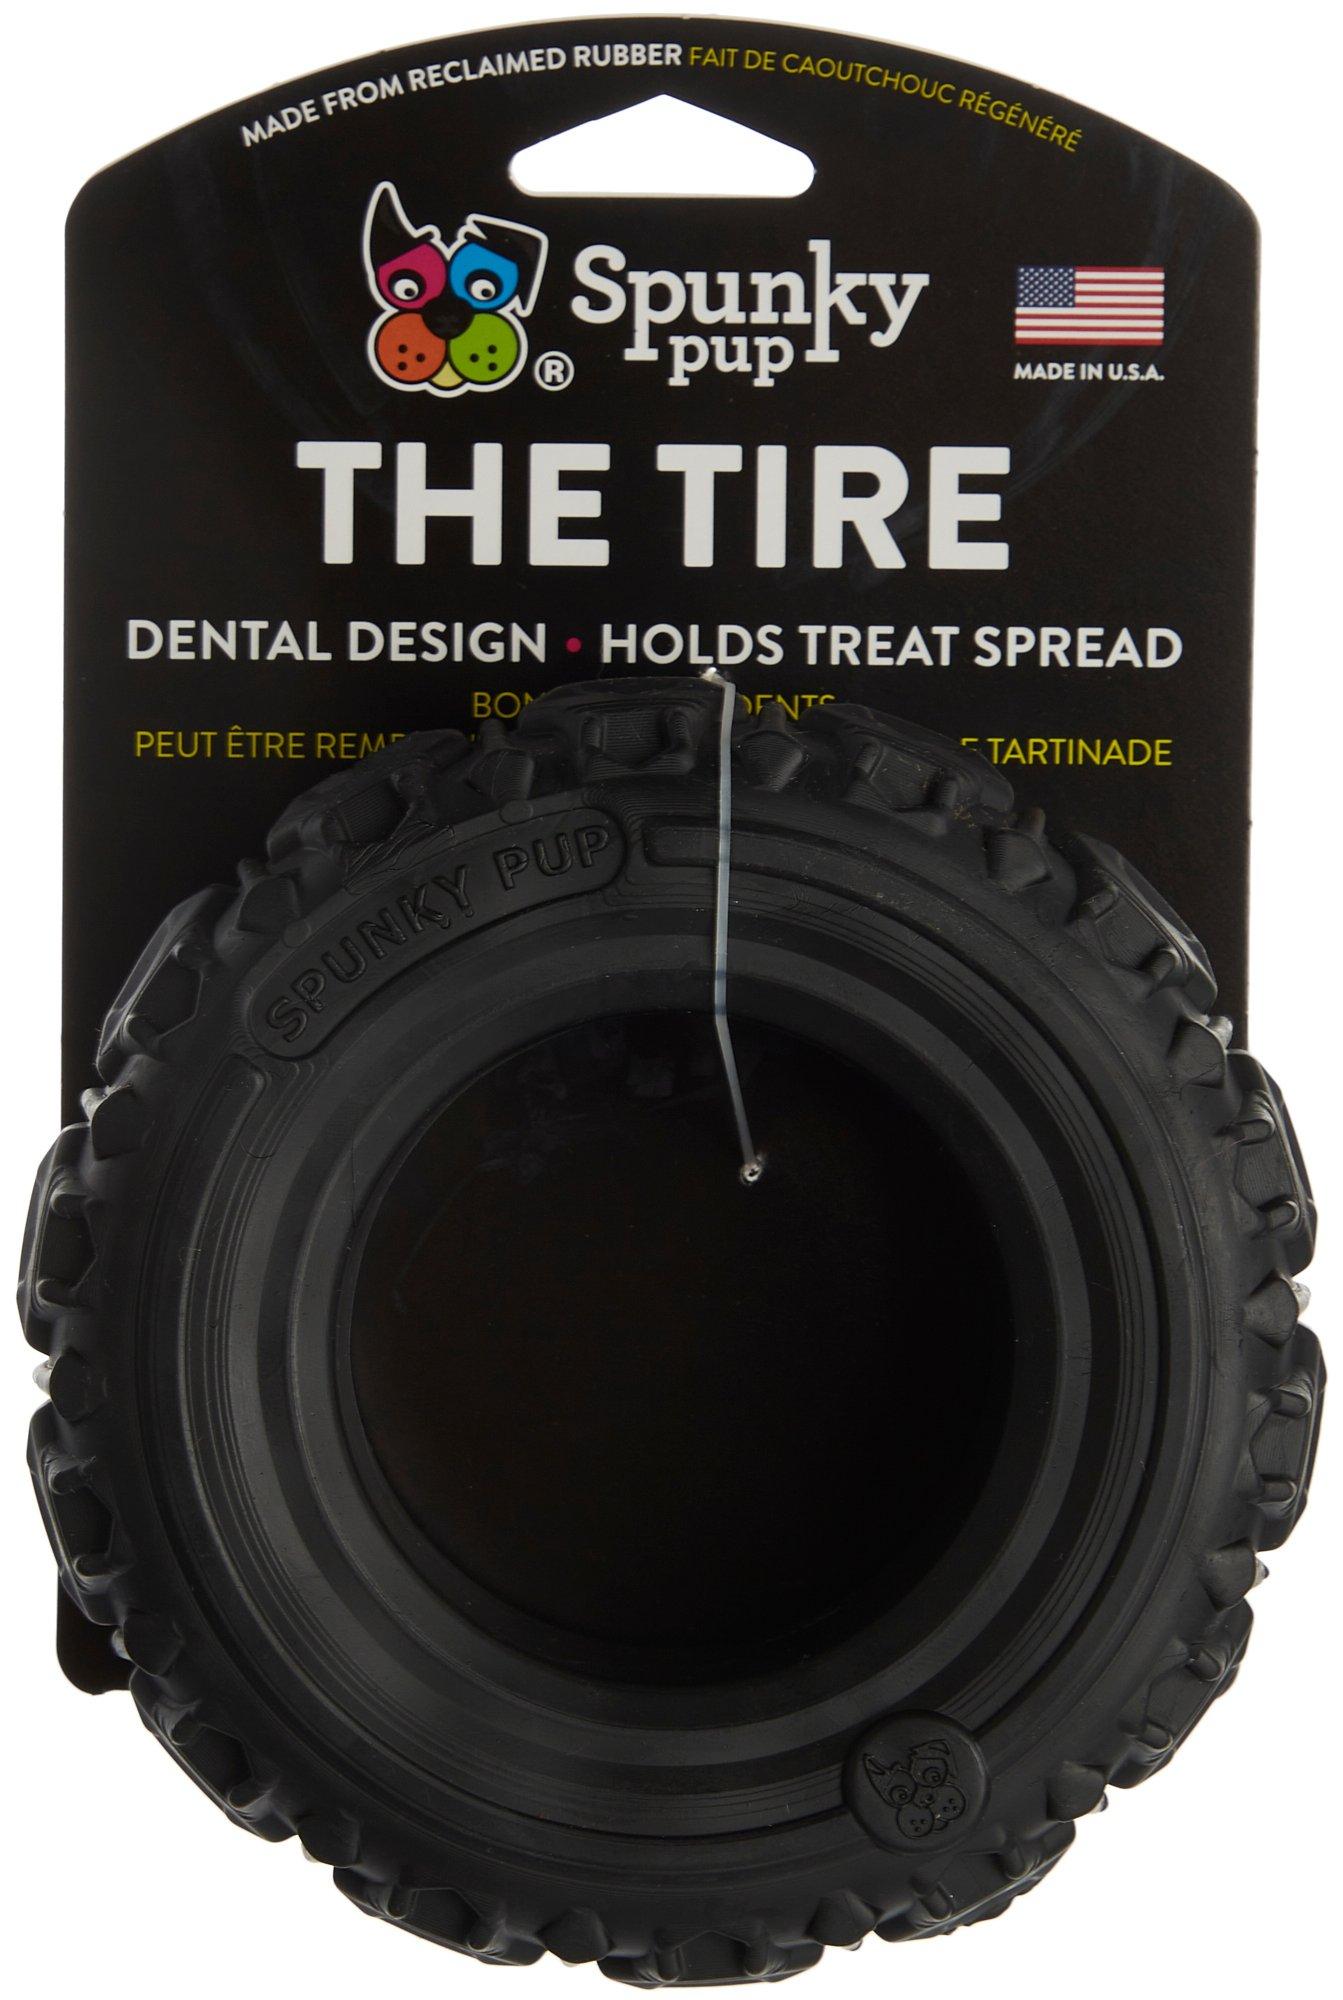 The Tire Large Dog Chew Toy